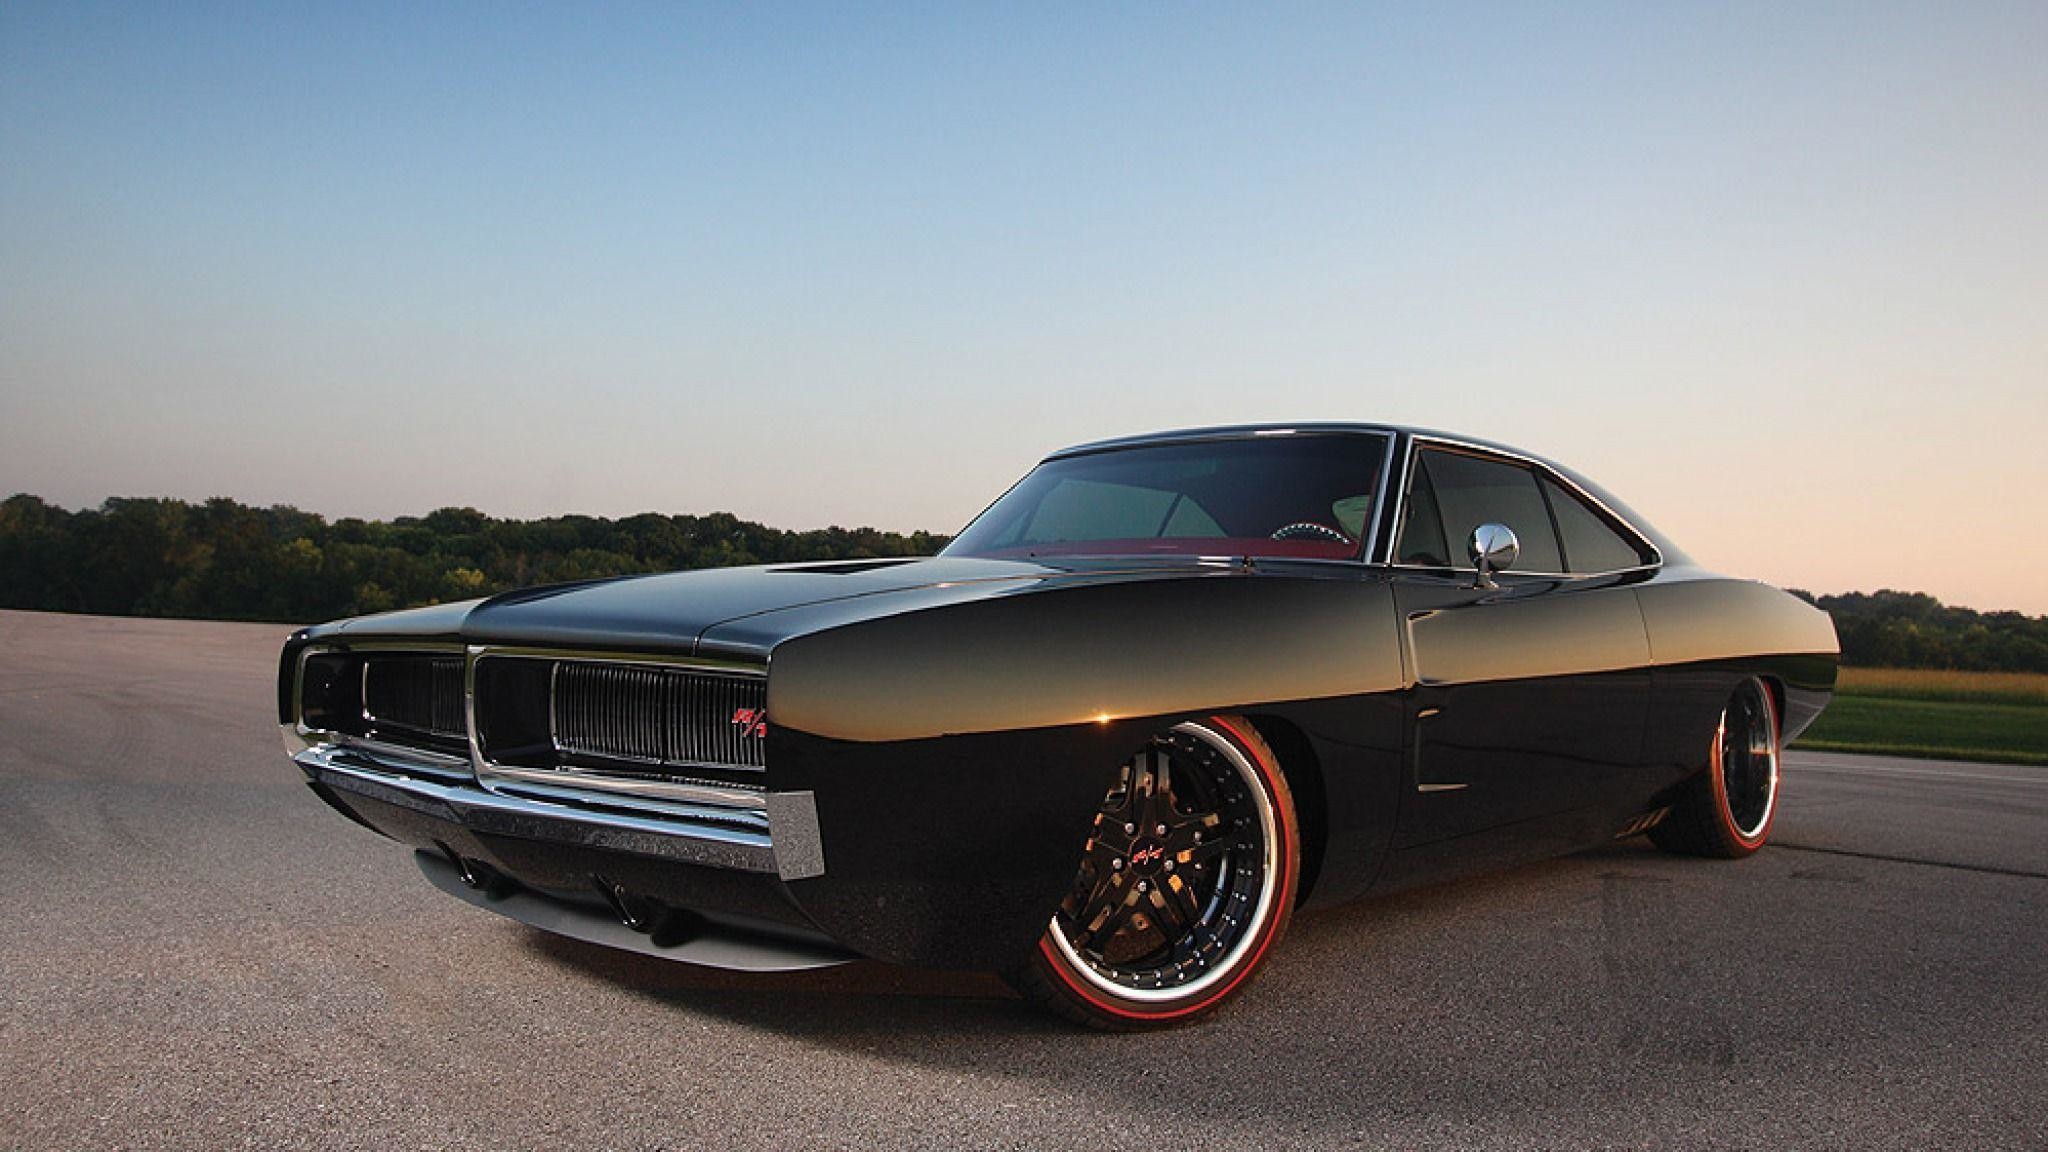 Dodge Charger Wallpaper Dodge Charger R T Hd Widescreen - Dodge Charger Rt 1970 Custom - HD Wallpaper 